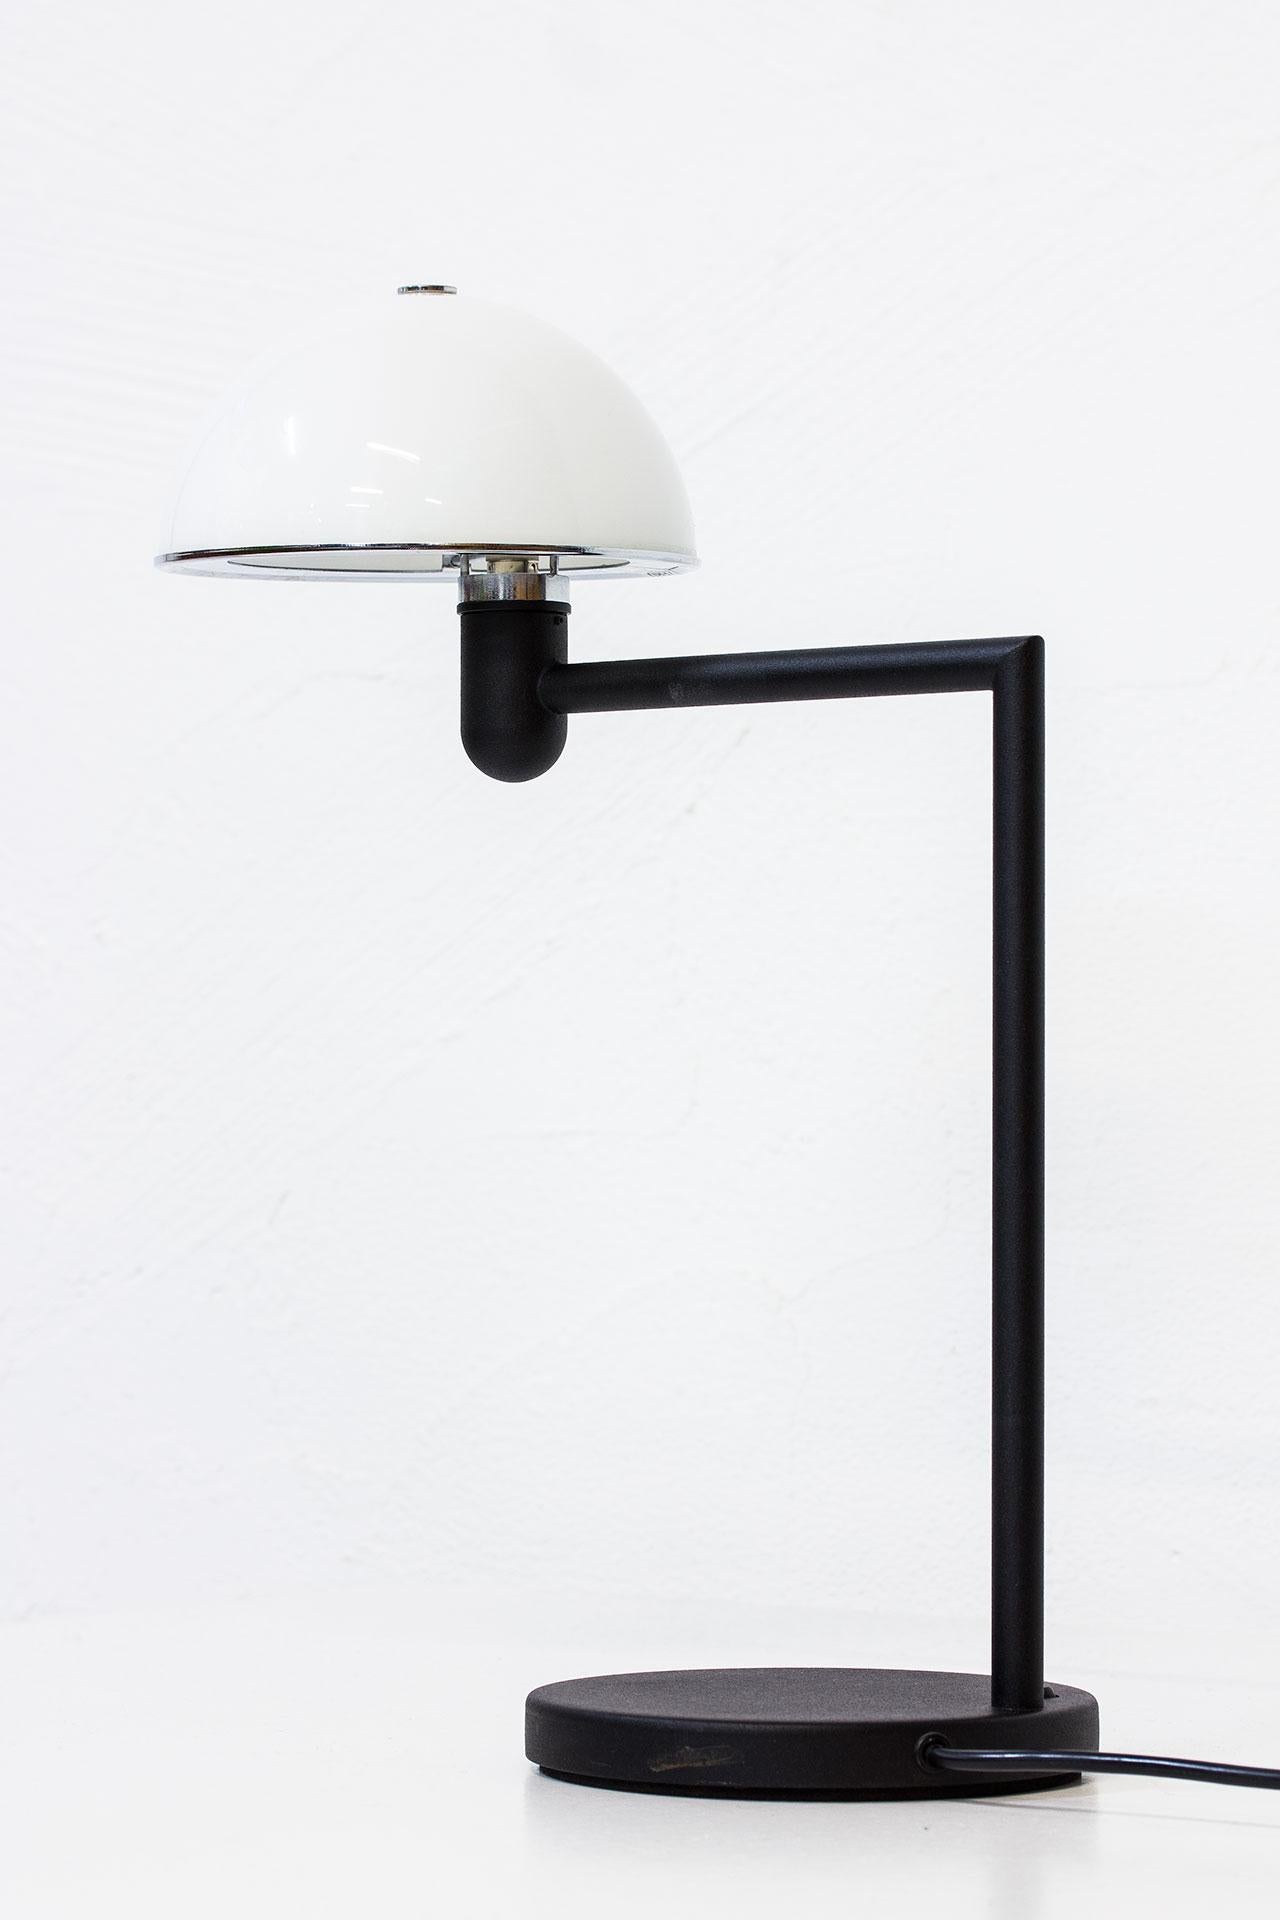 Table lamp designed by Per Sundstedt for Zero Interior in Sweden during the 1980s. 
Matte black painted steel stem with a white opal glass diffuser.
Light switch on the base.